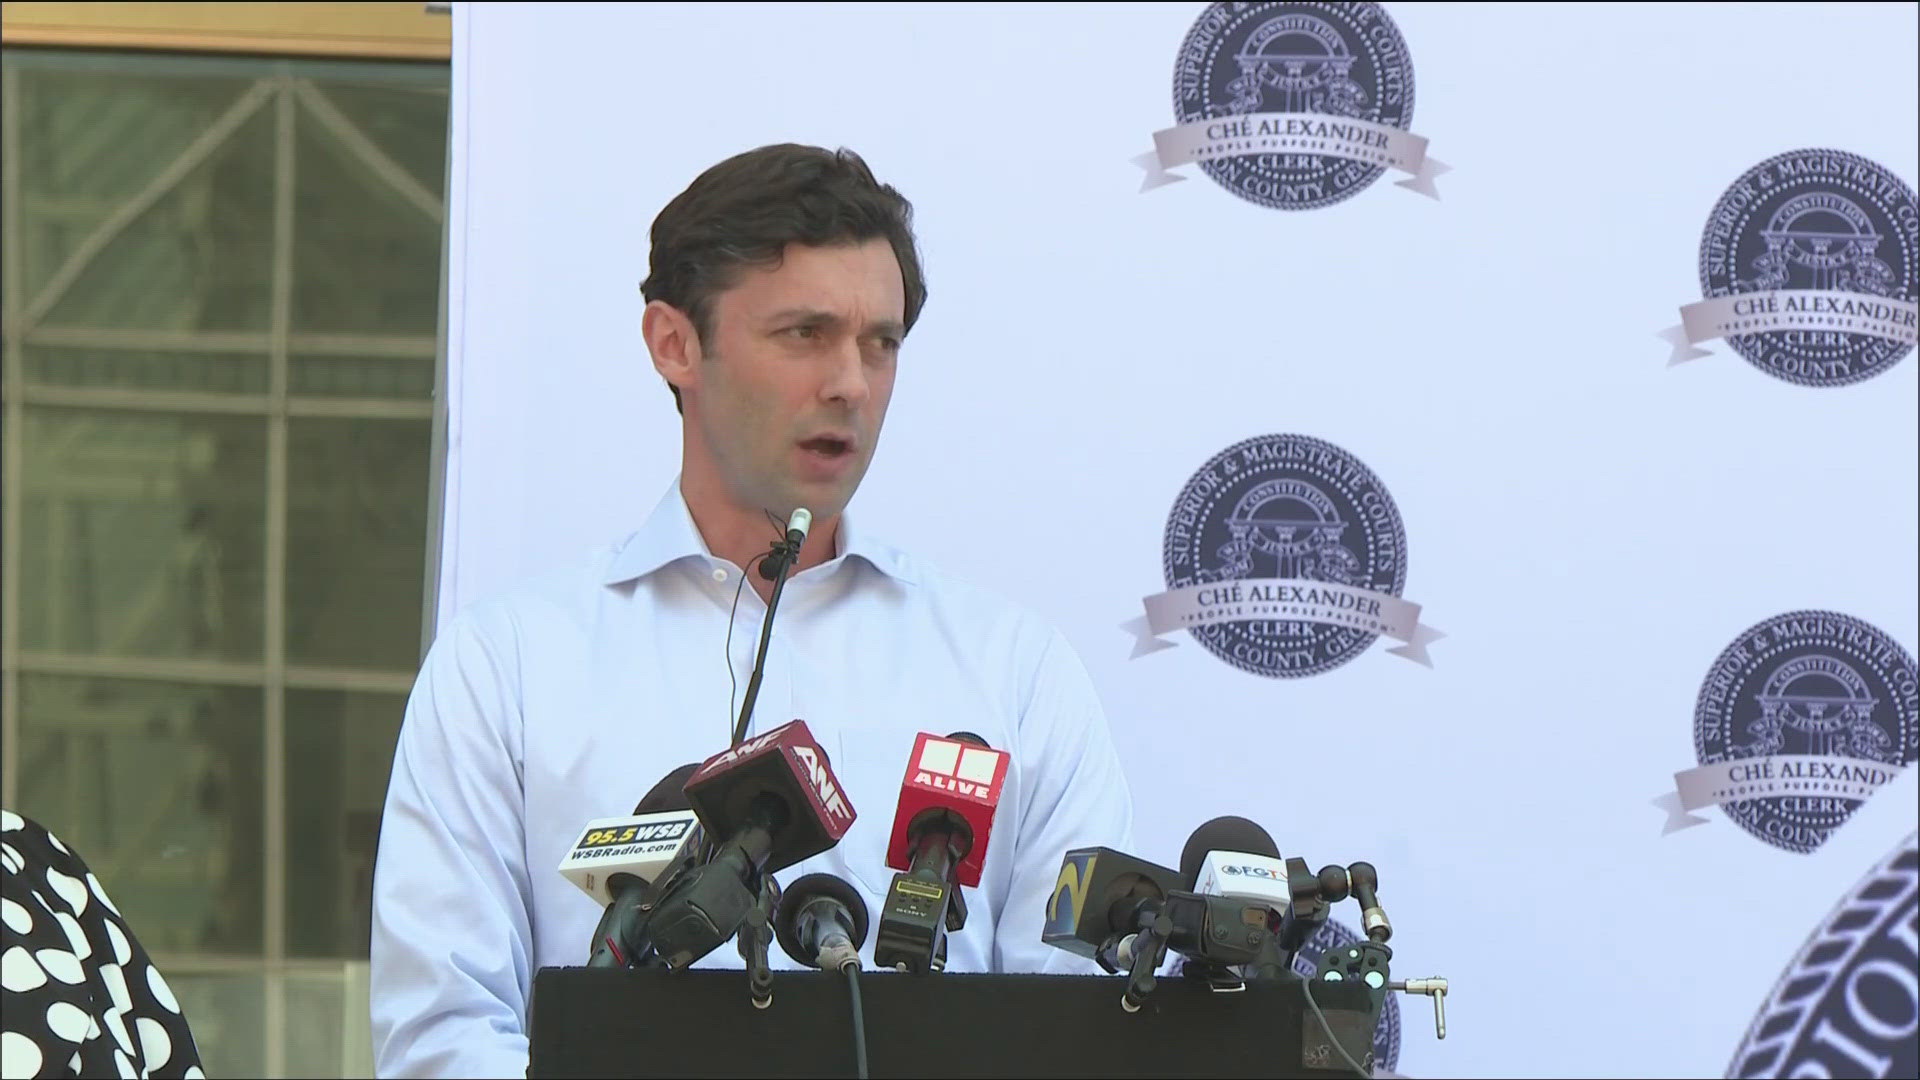 Sen. Ossoff held a news conference on Tuesday and addressed the issues in a letter to Inspector General Tammy Hull.